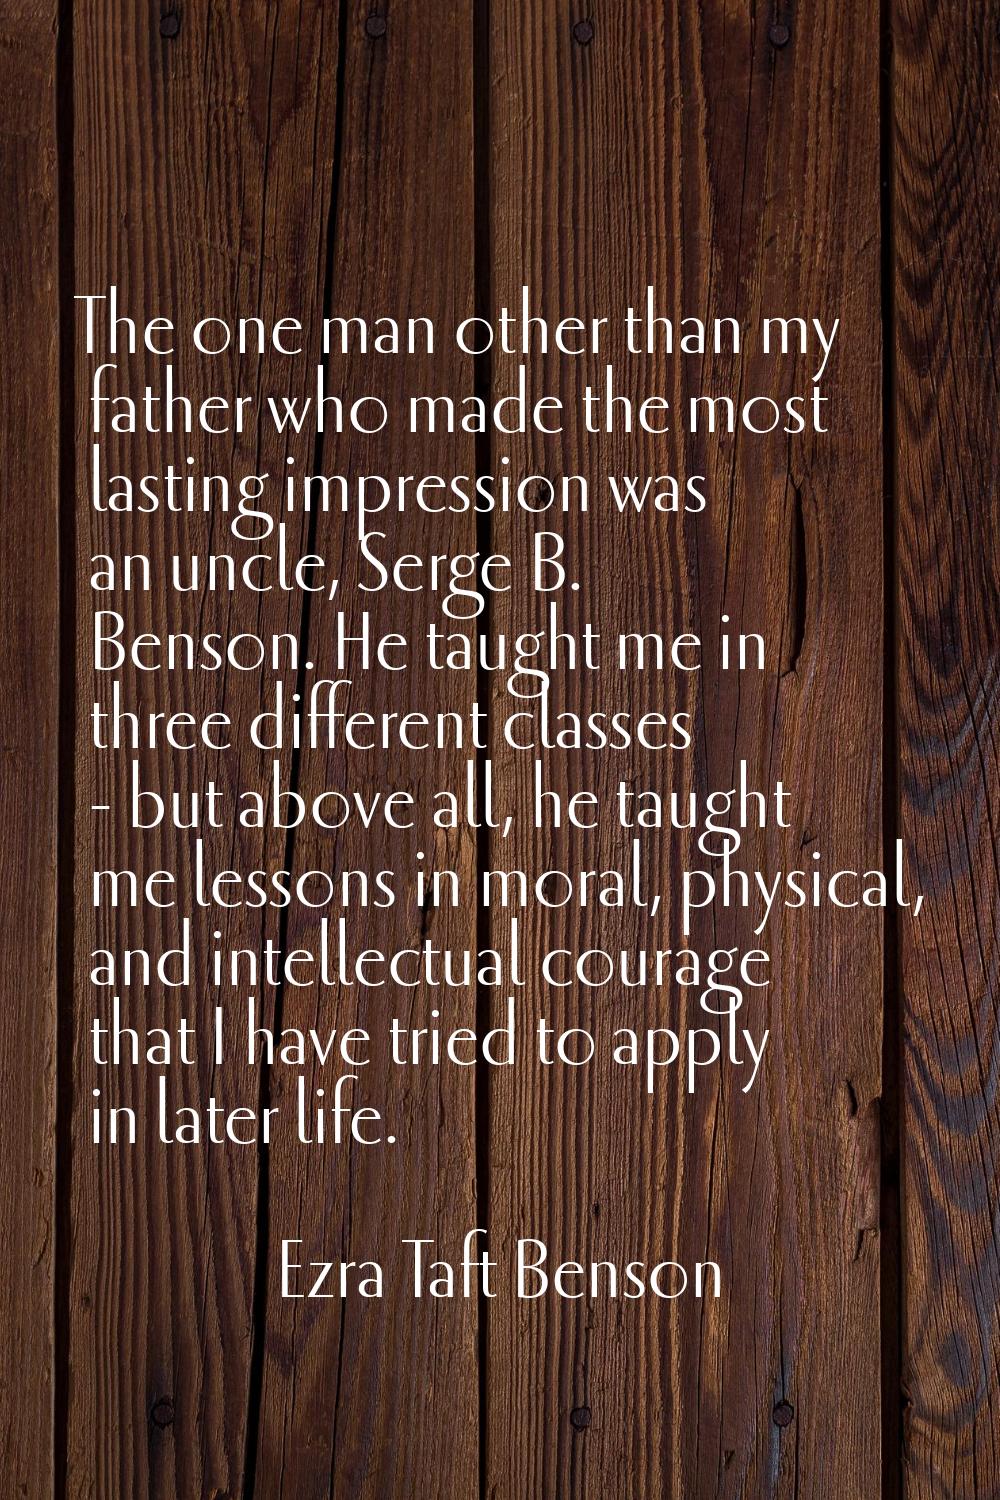 The one man other than my father who made the most lasting impression was an uncle, Serge B. Benson